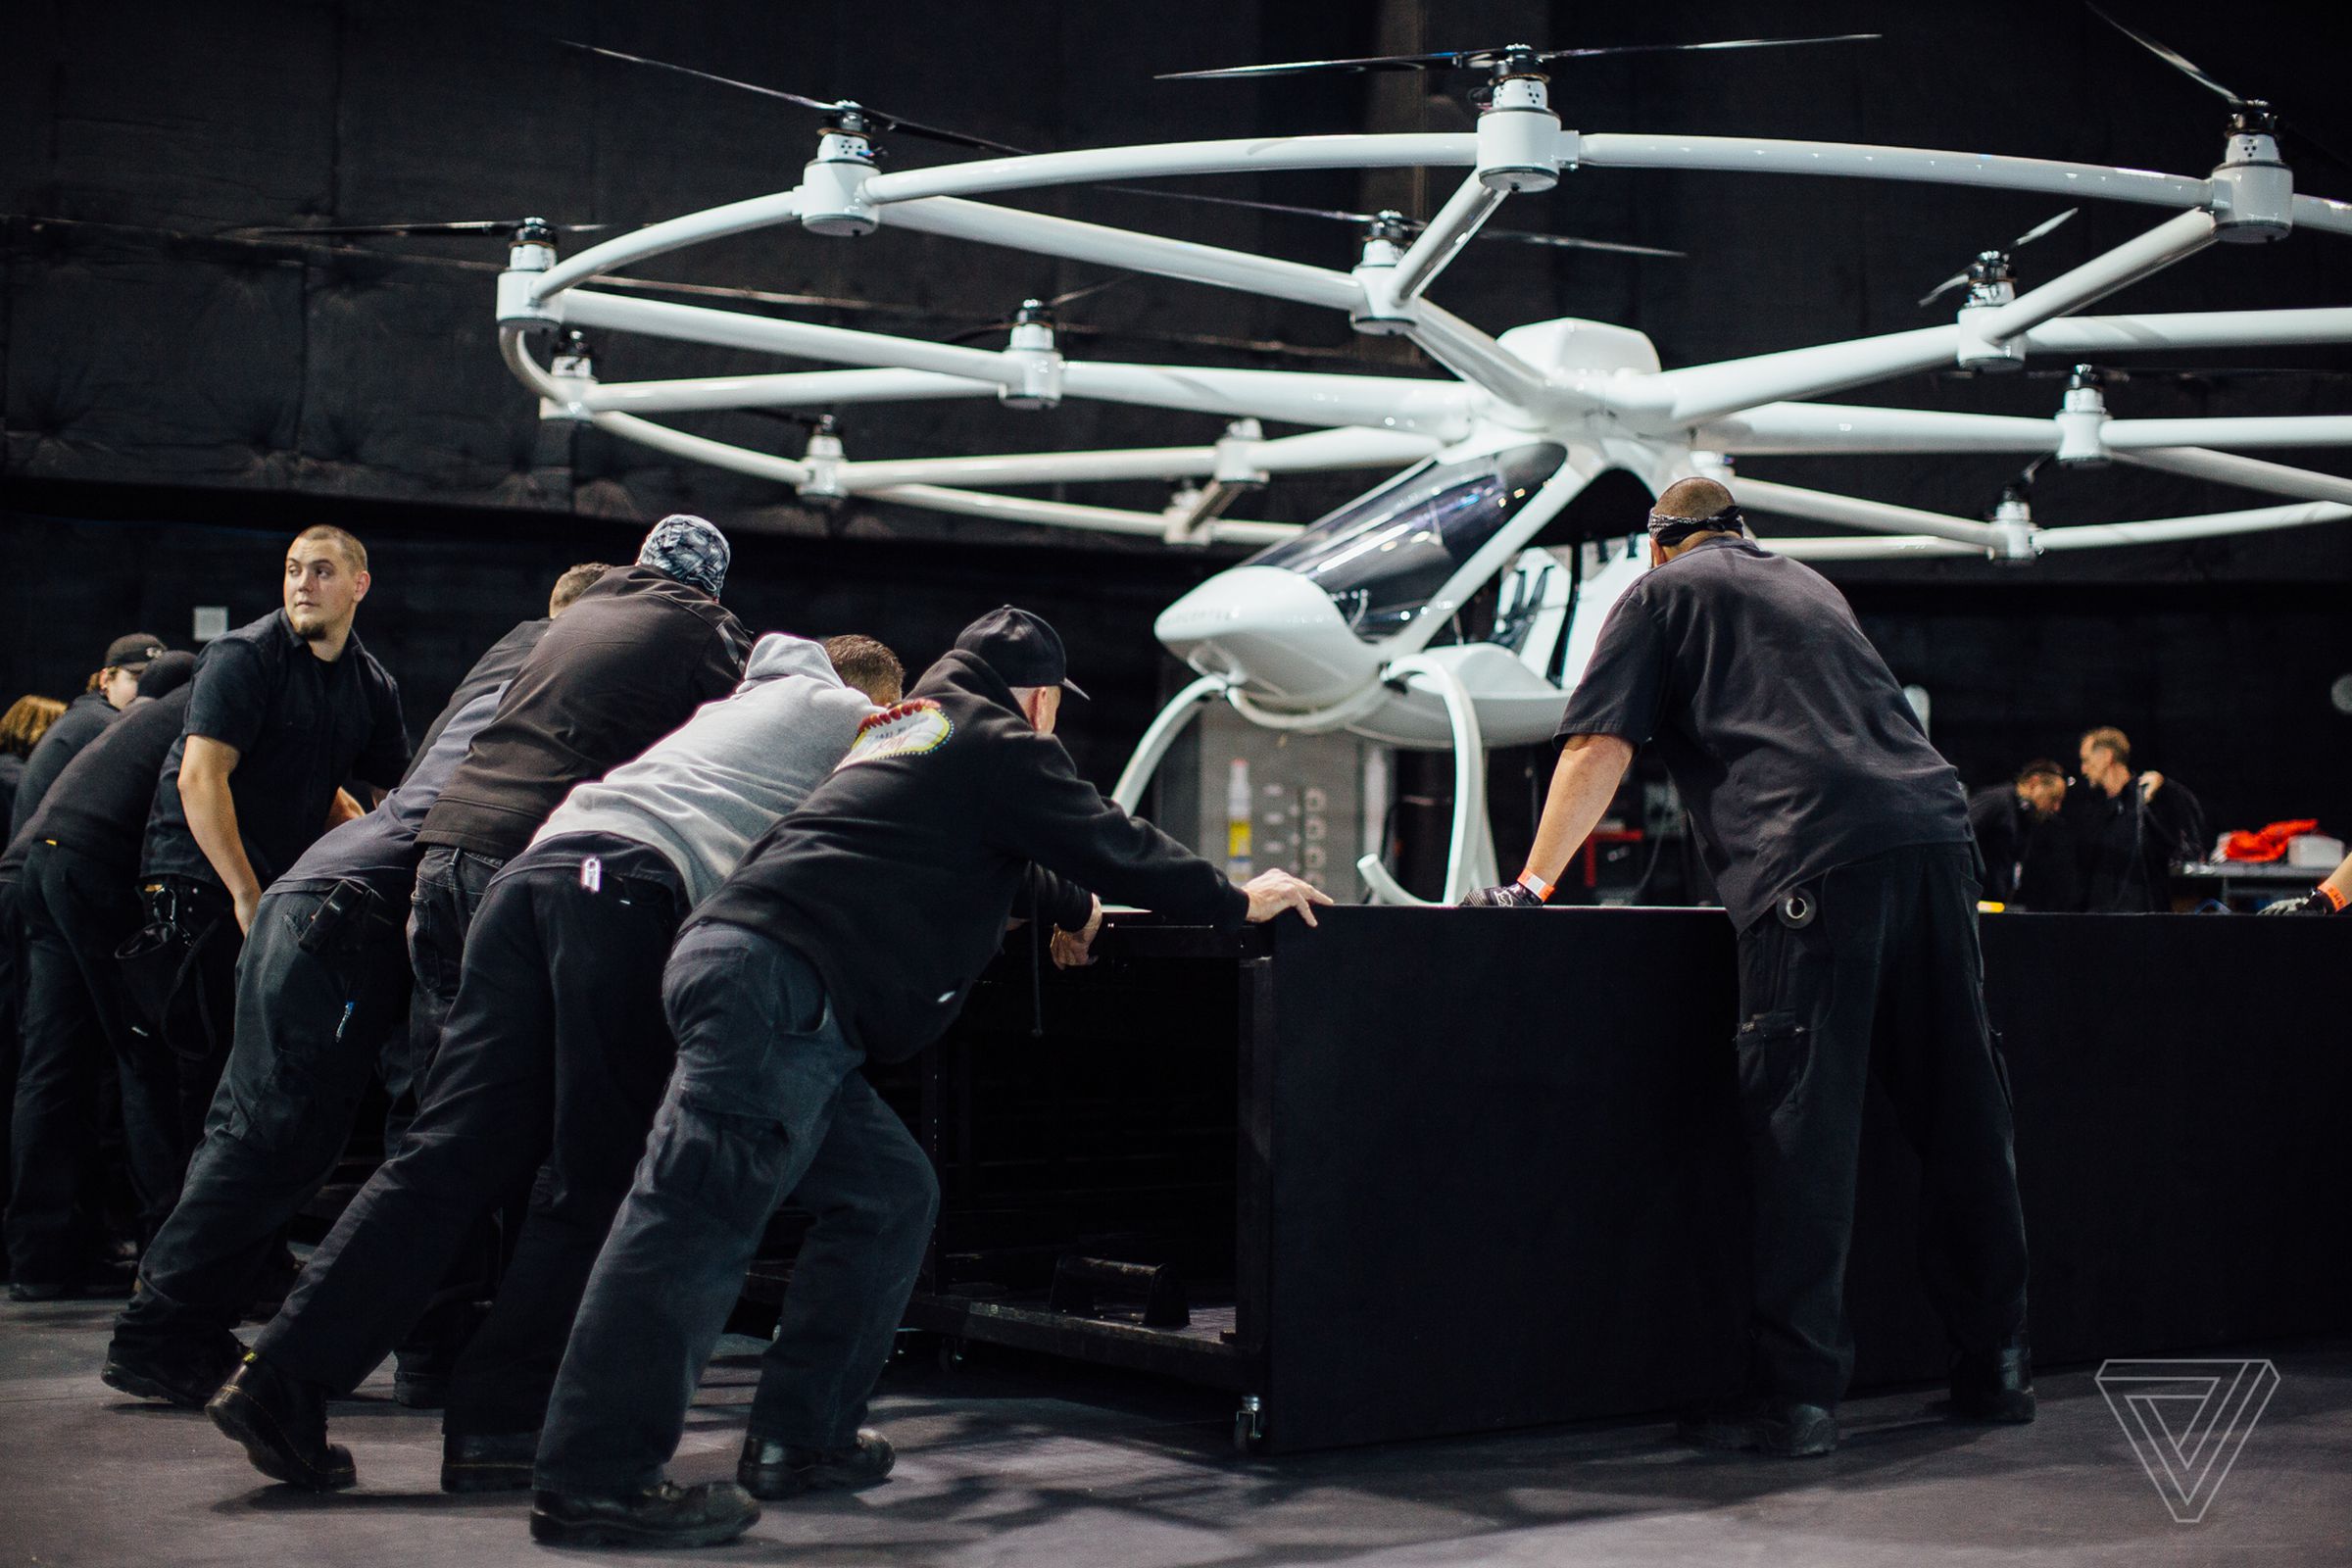 After rehearsal, workers reset the stage with the Volocopter.